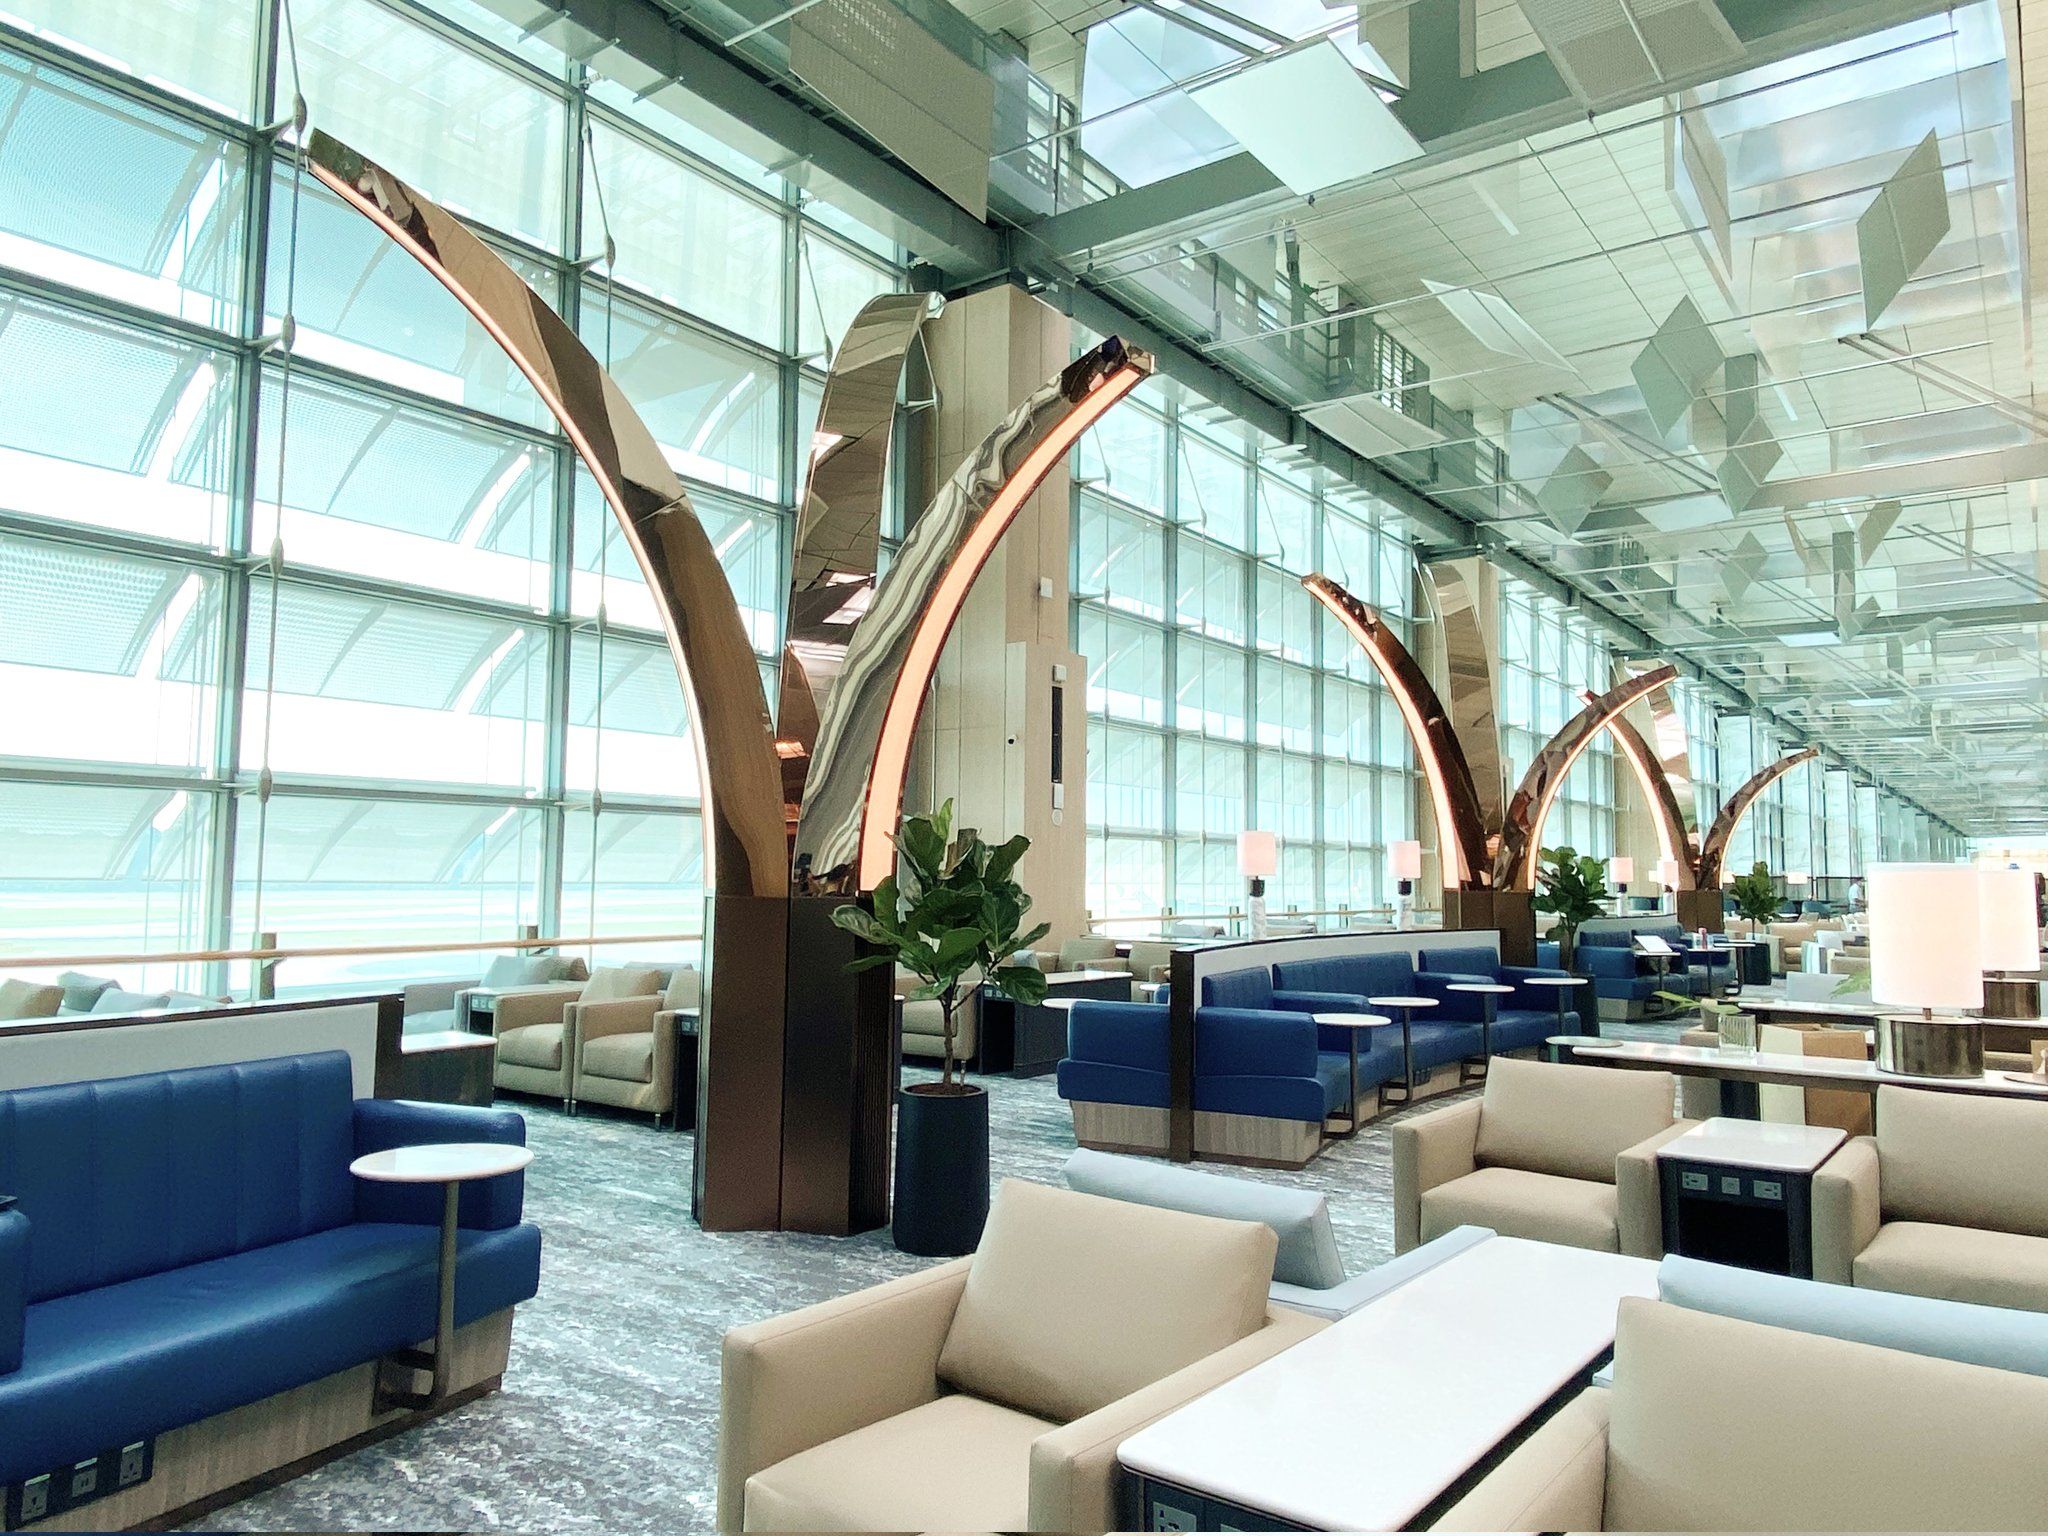 How to design an airport lounge